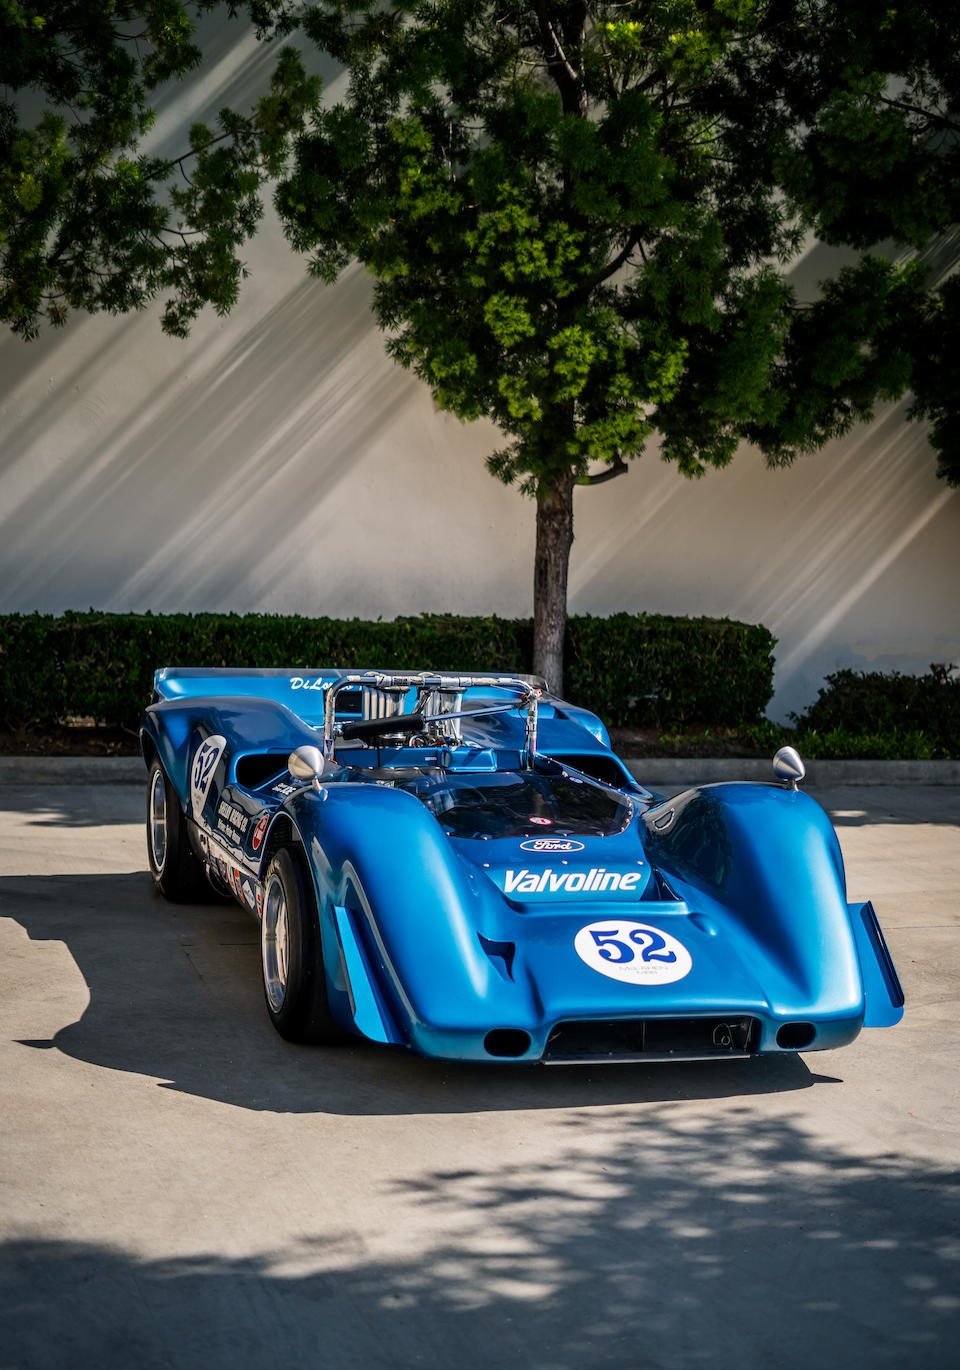 <b>1968 McLaren M6B Can-Am</b><br />Chassis no. 50-12